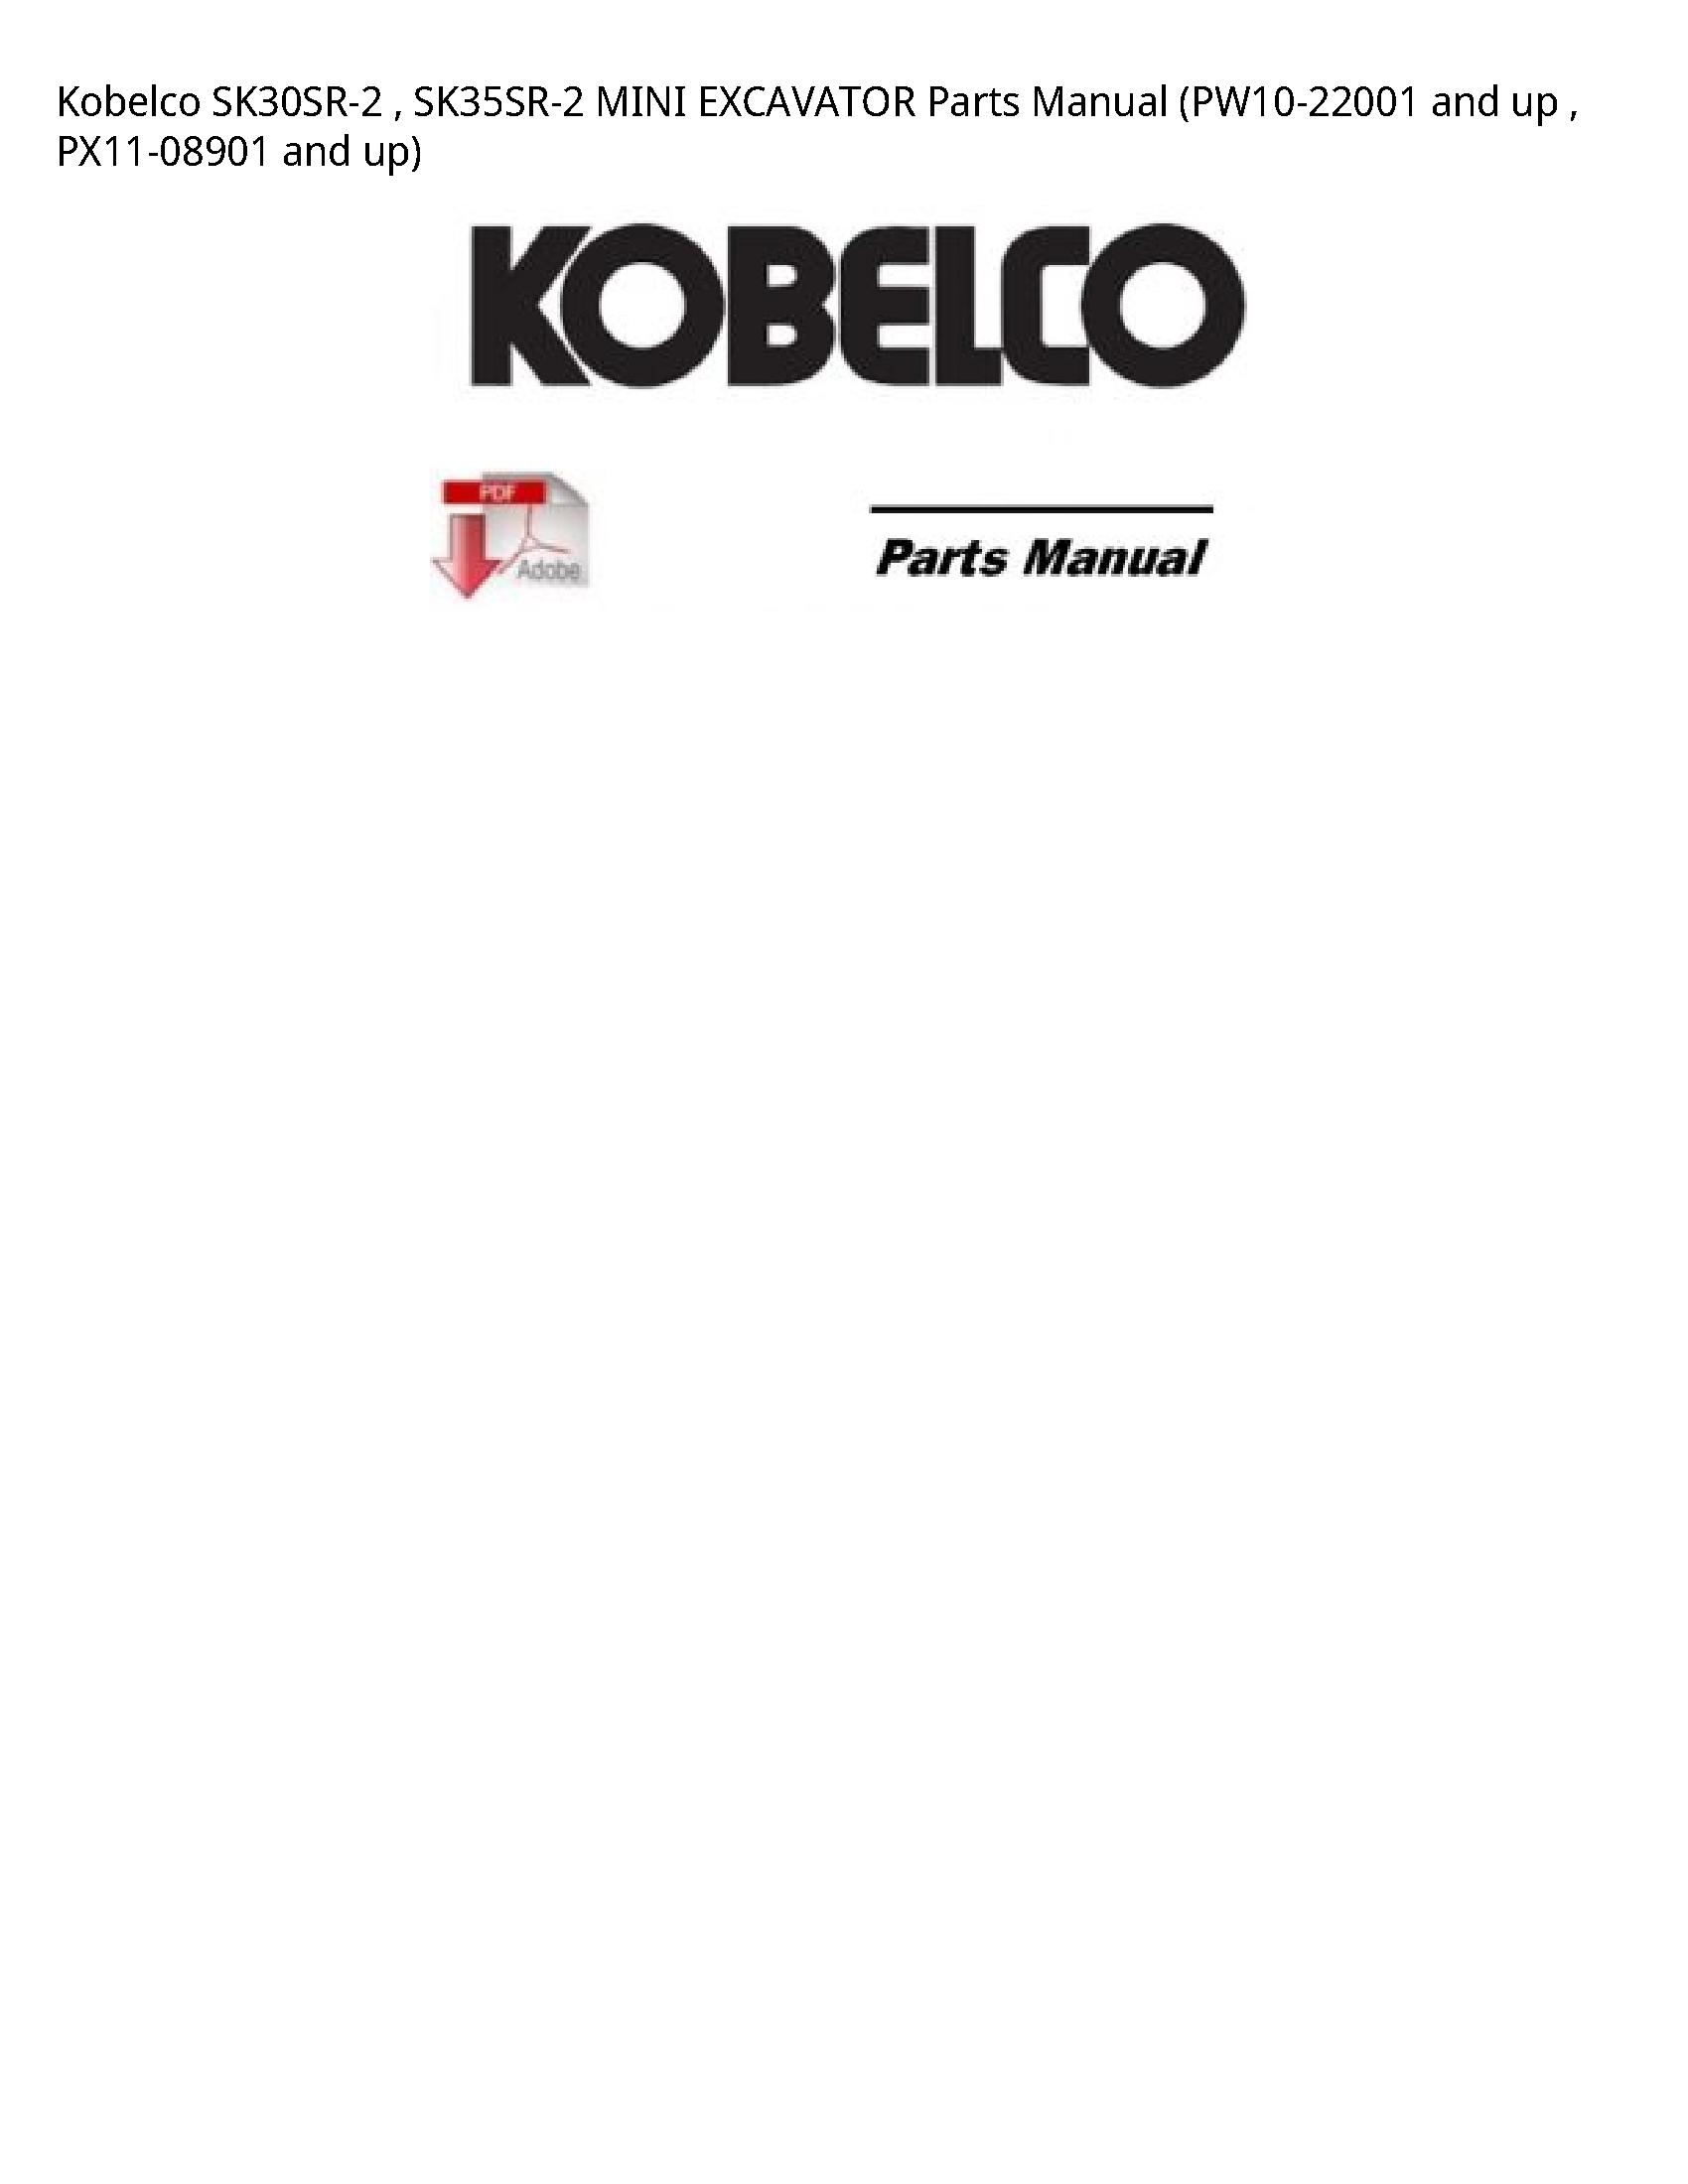 Kobelco SK30SR-2   SK35SR-2 MINI EXCAVATOR Parts Manual (PW10-22001 and up   PX11-08901 and up)